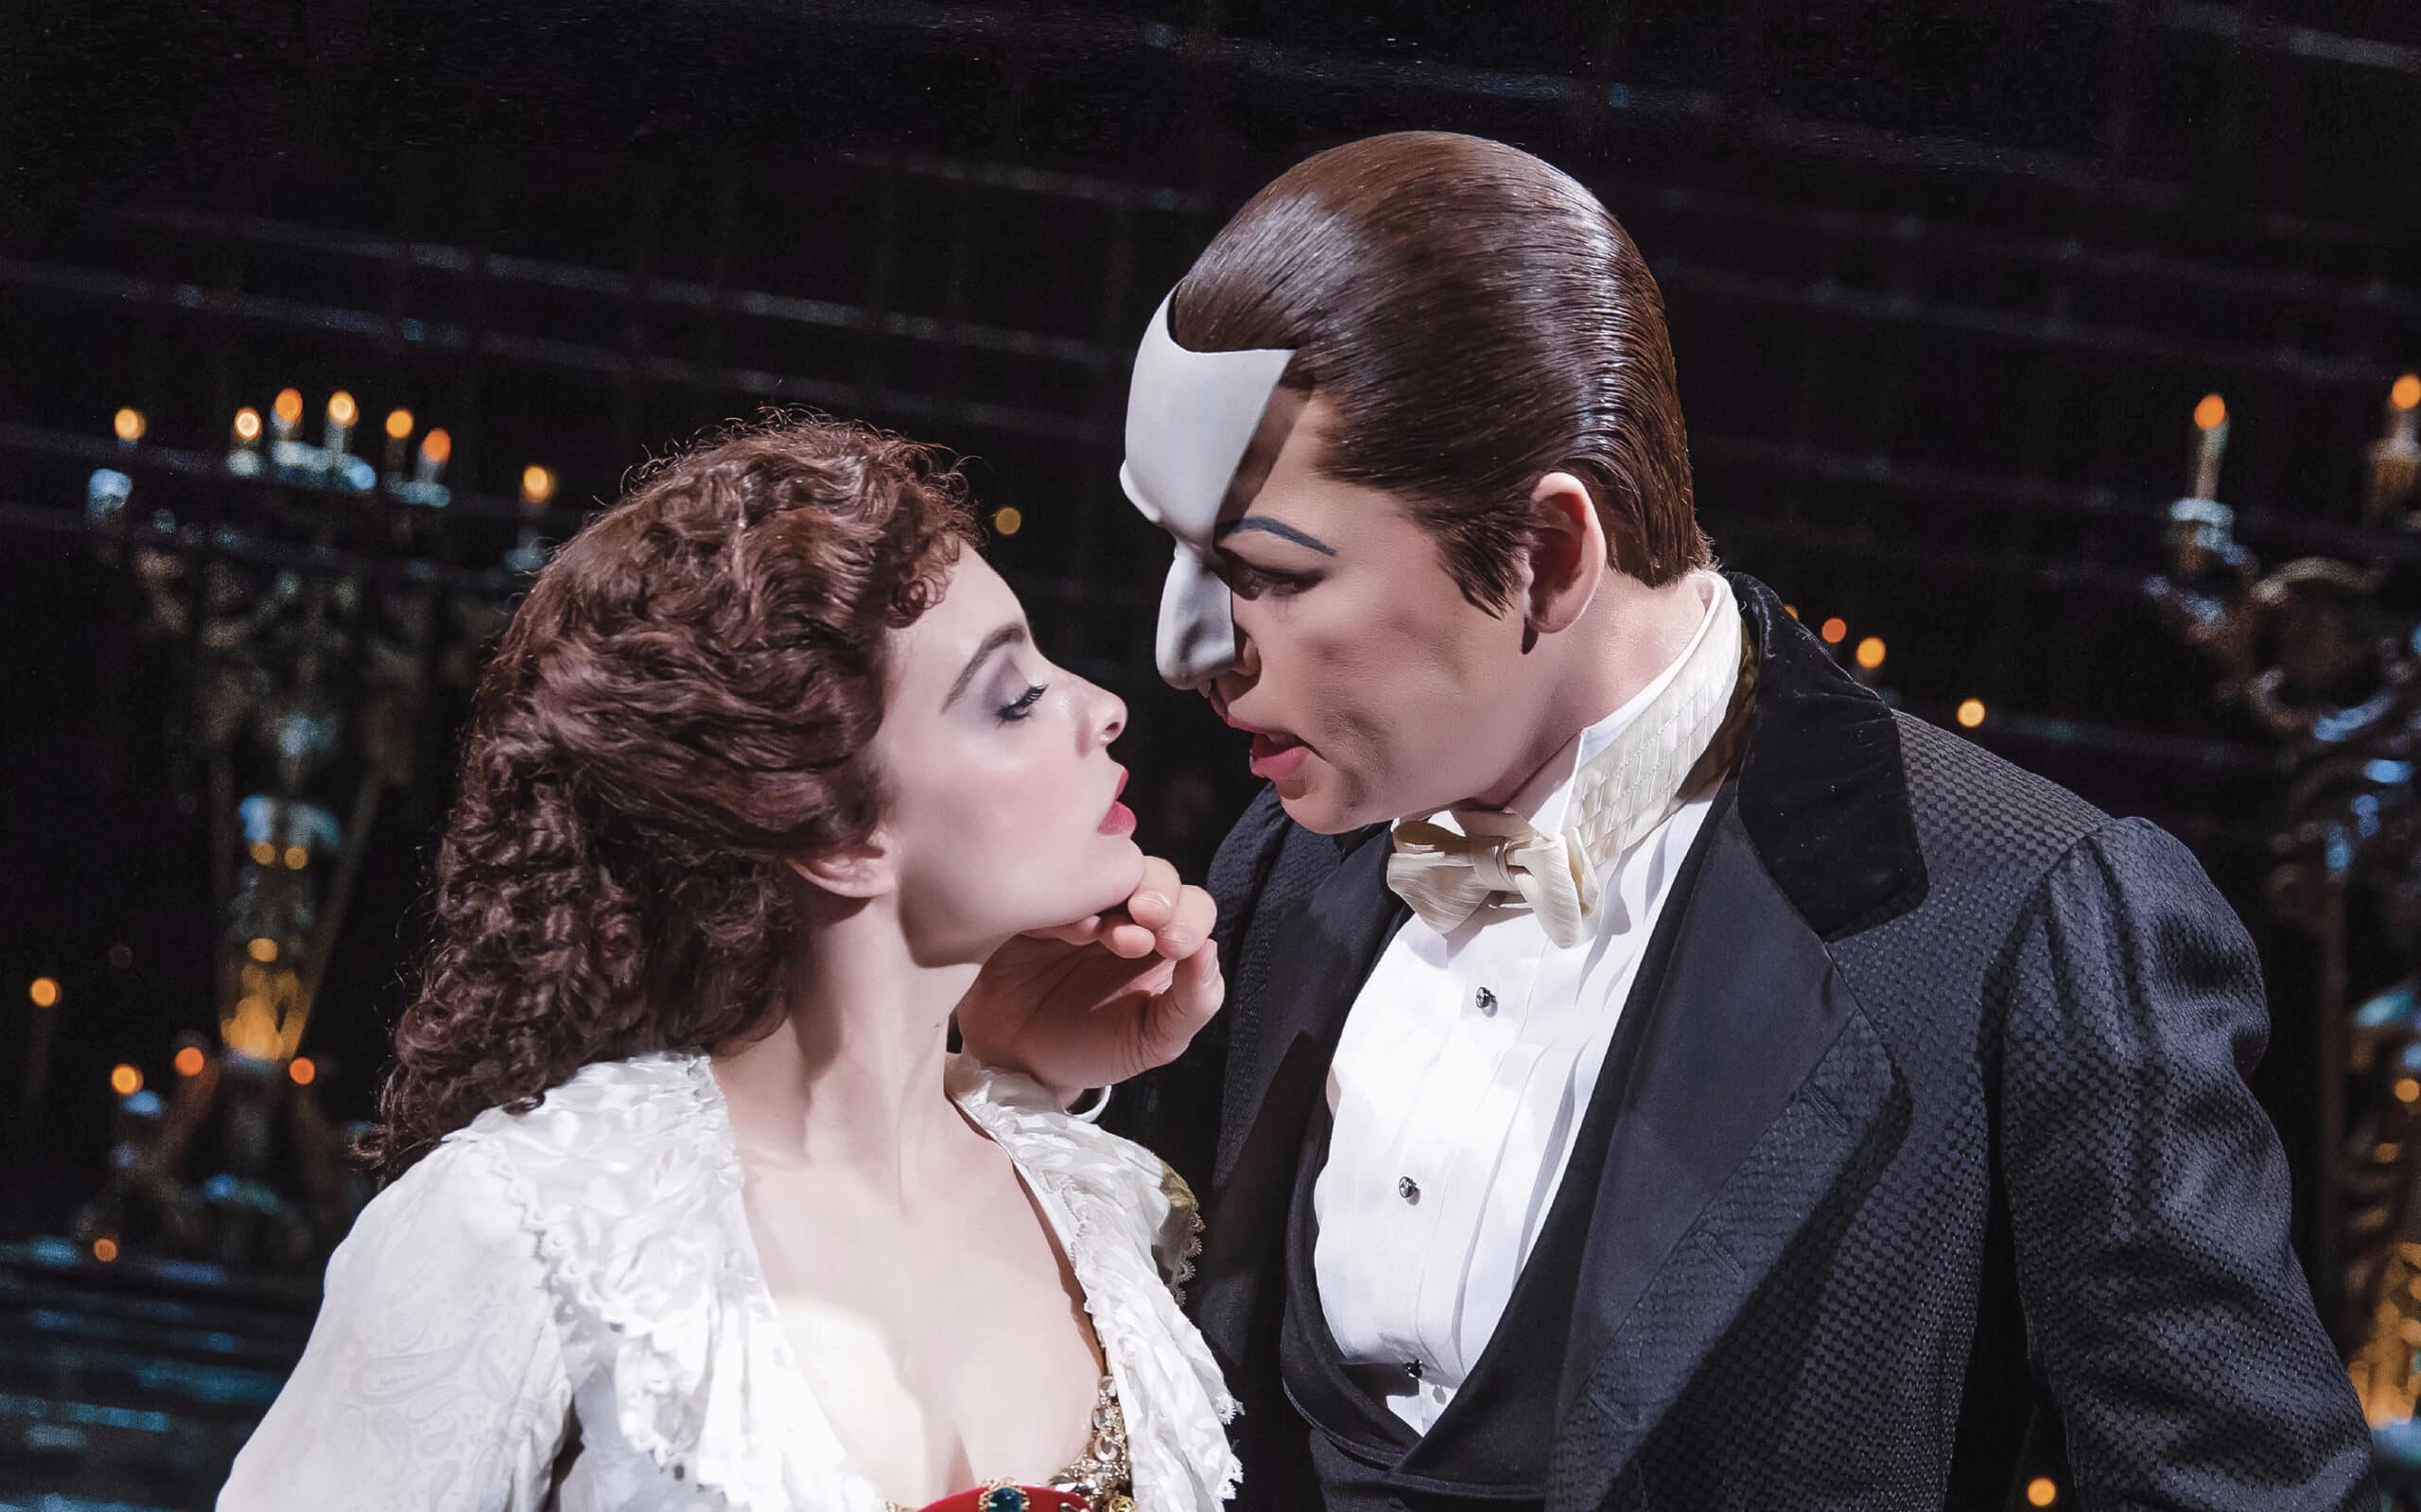 Publicity shot from Phantom of the Opera, the Phantom tipping Christine’s chin toward his face.